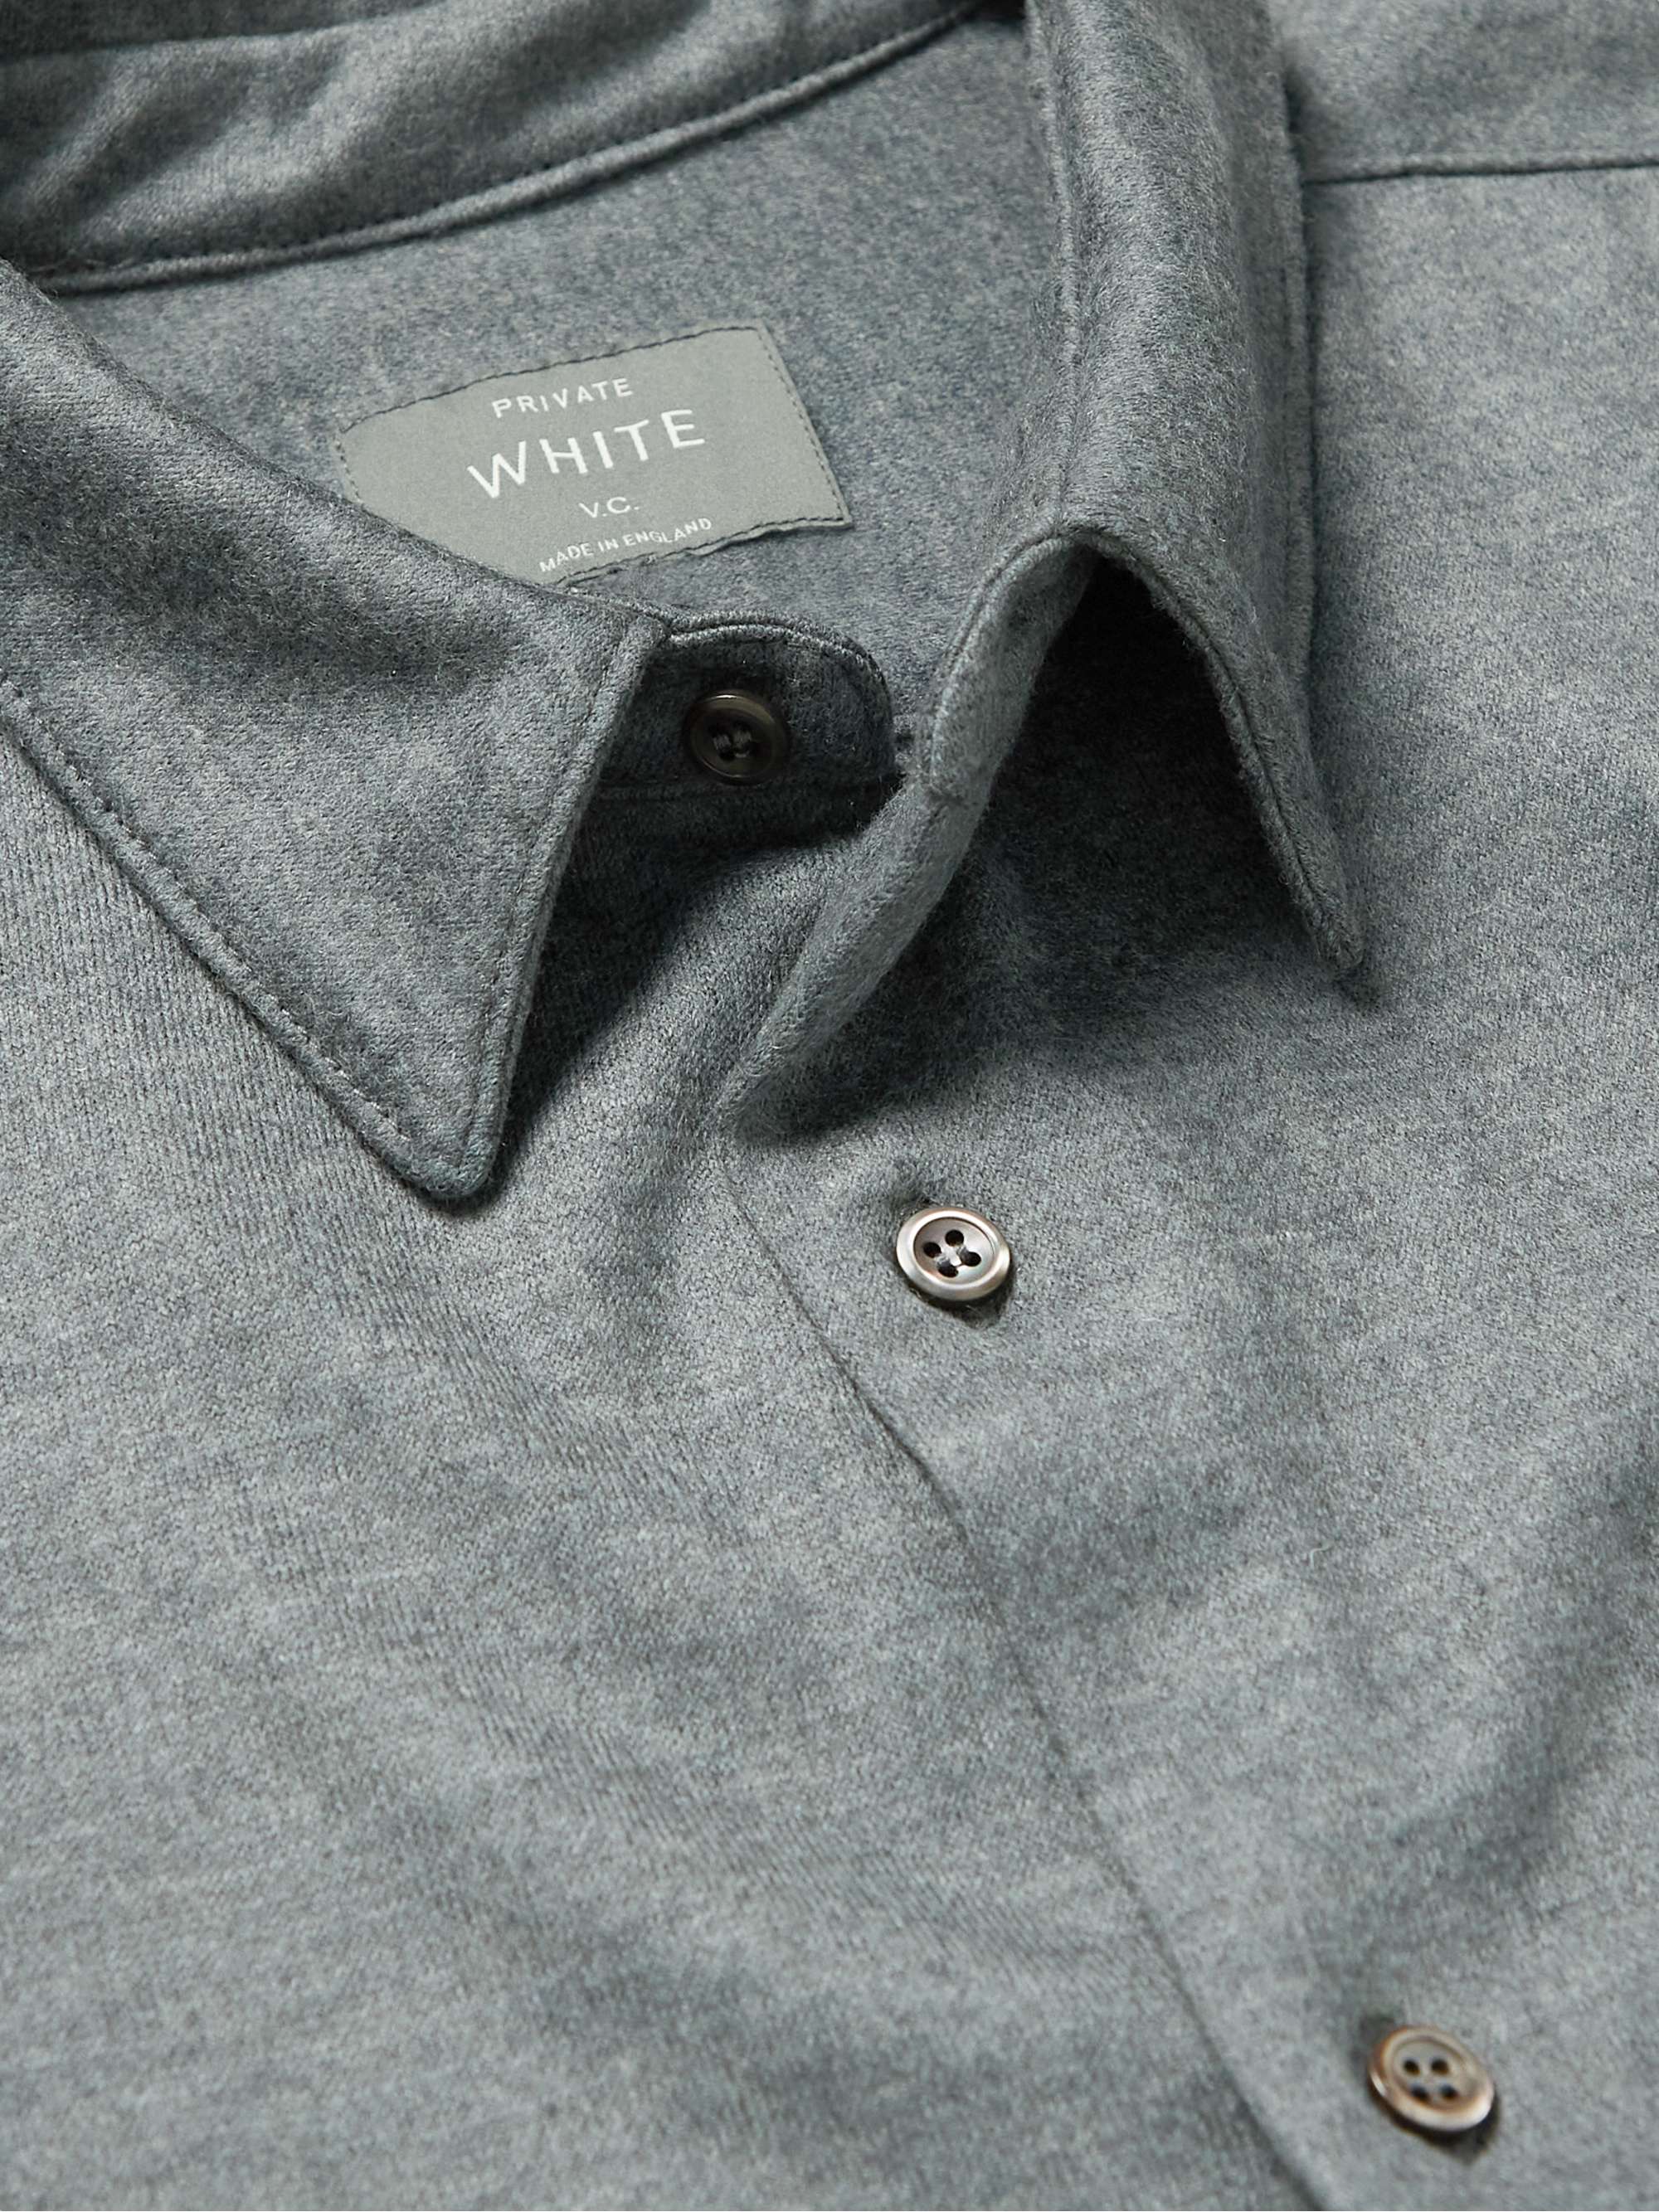 PRIVATE WHITE V.C. Wool and Cashmere-Blend Jersey Shirt